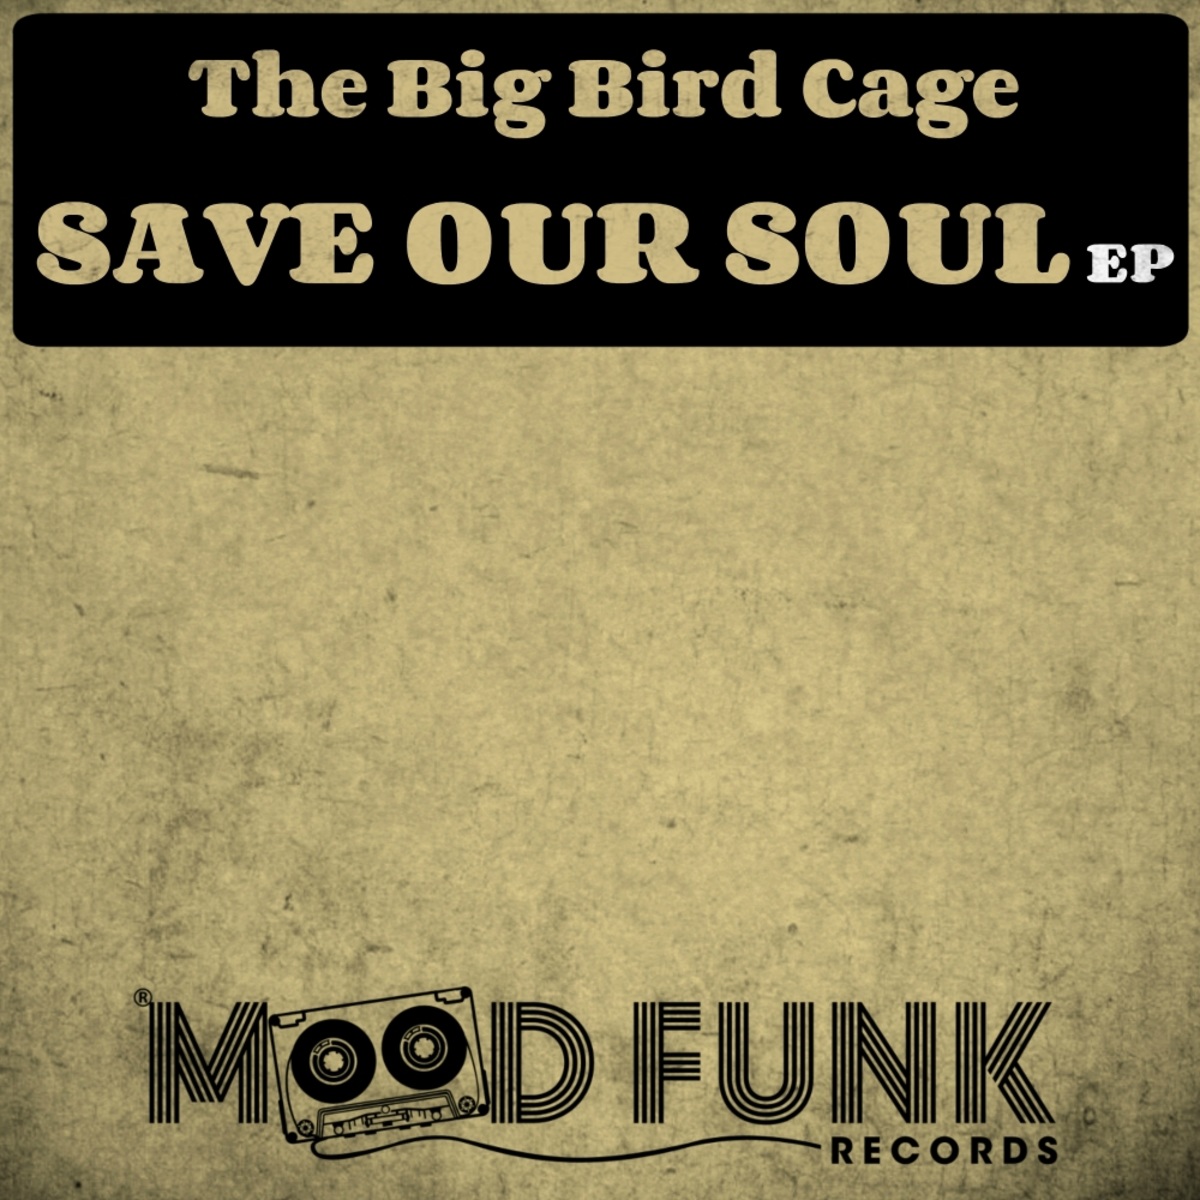 The Big Bird Cage - Save Our Soul EP / Mood Funk Records